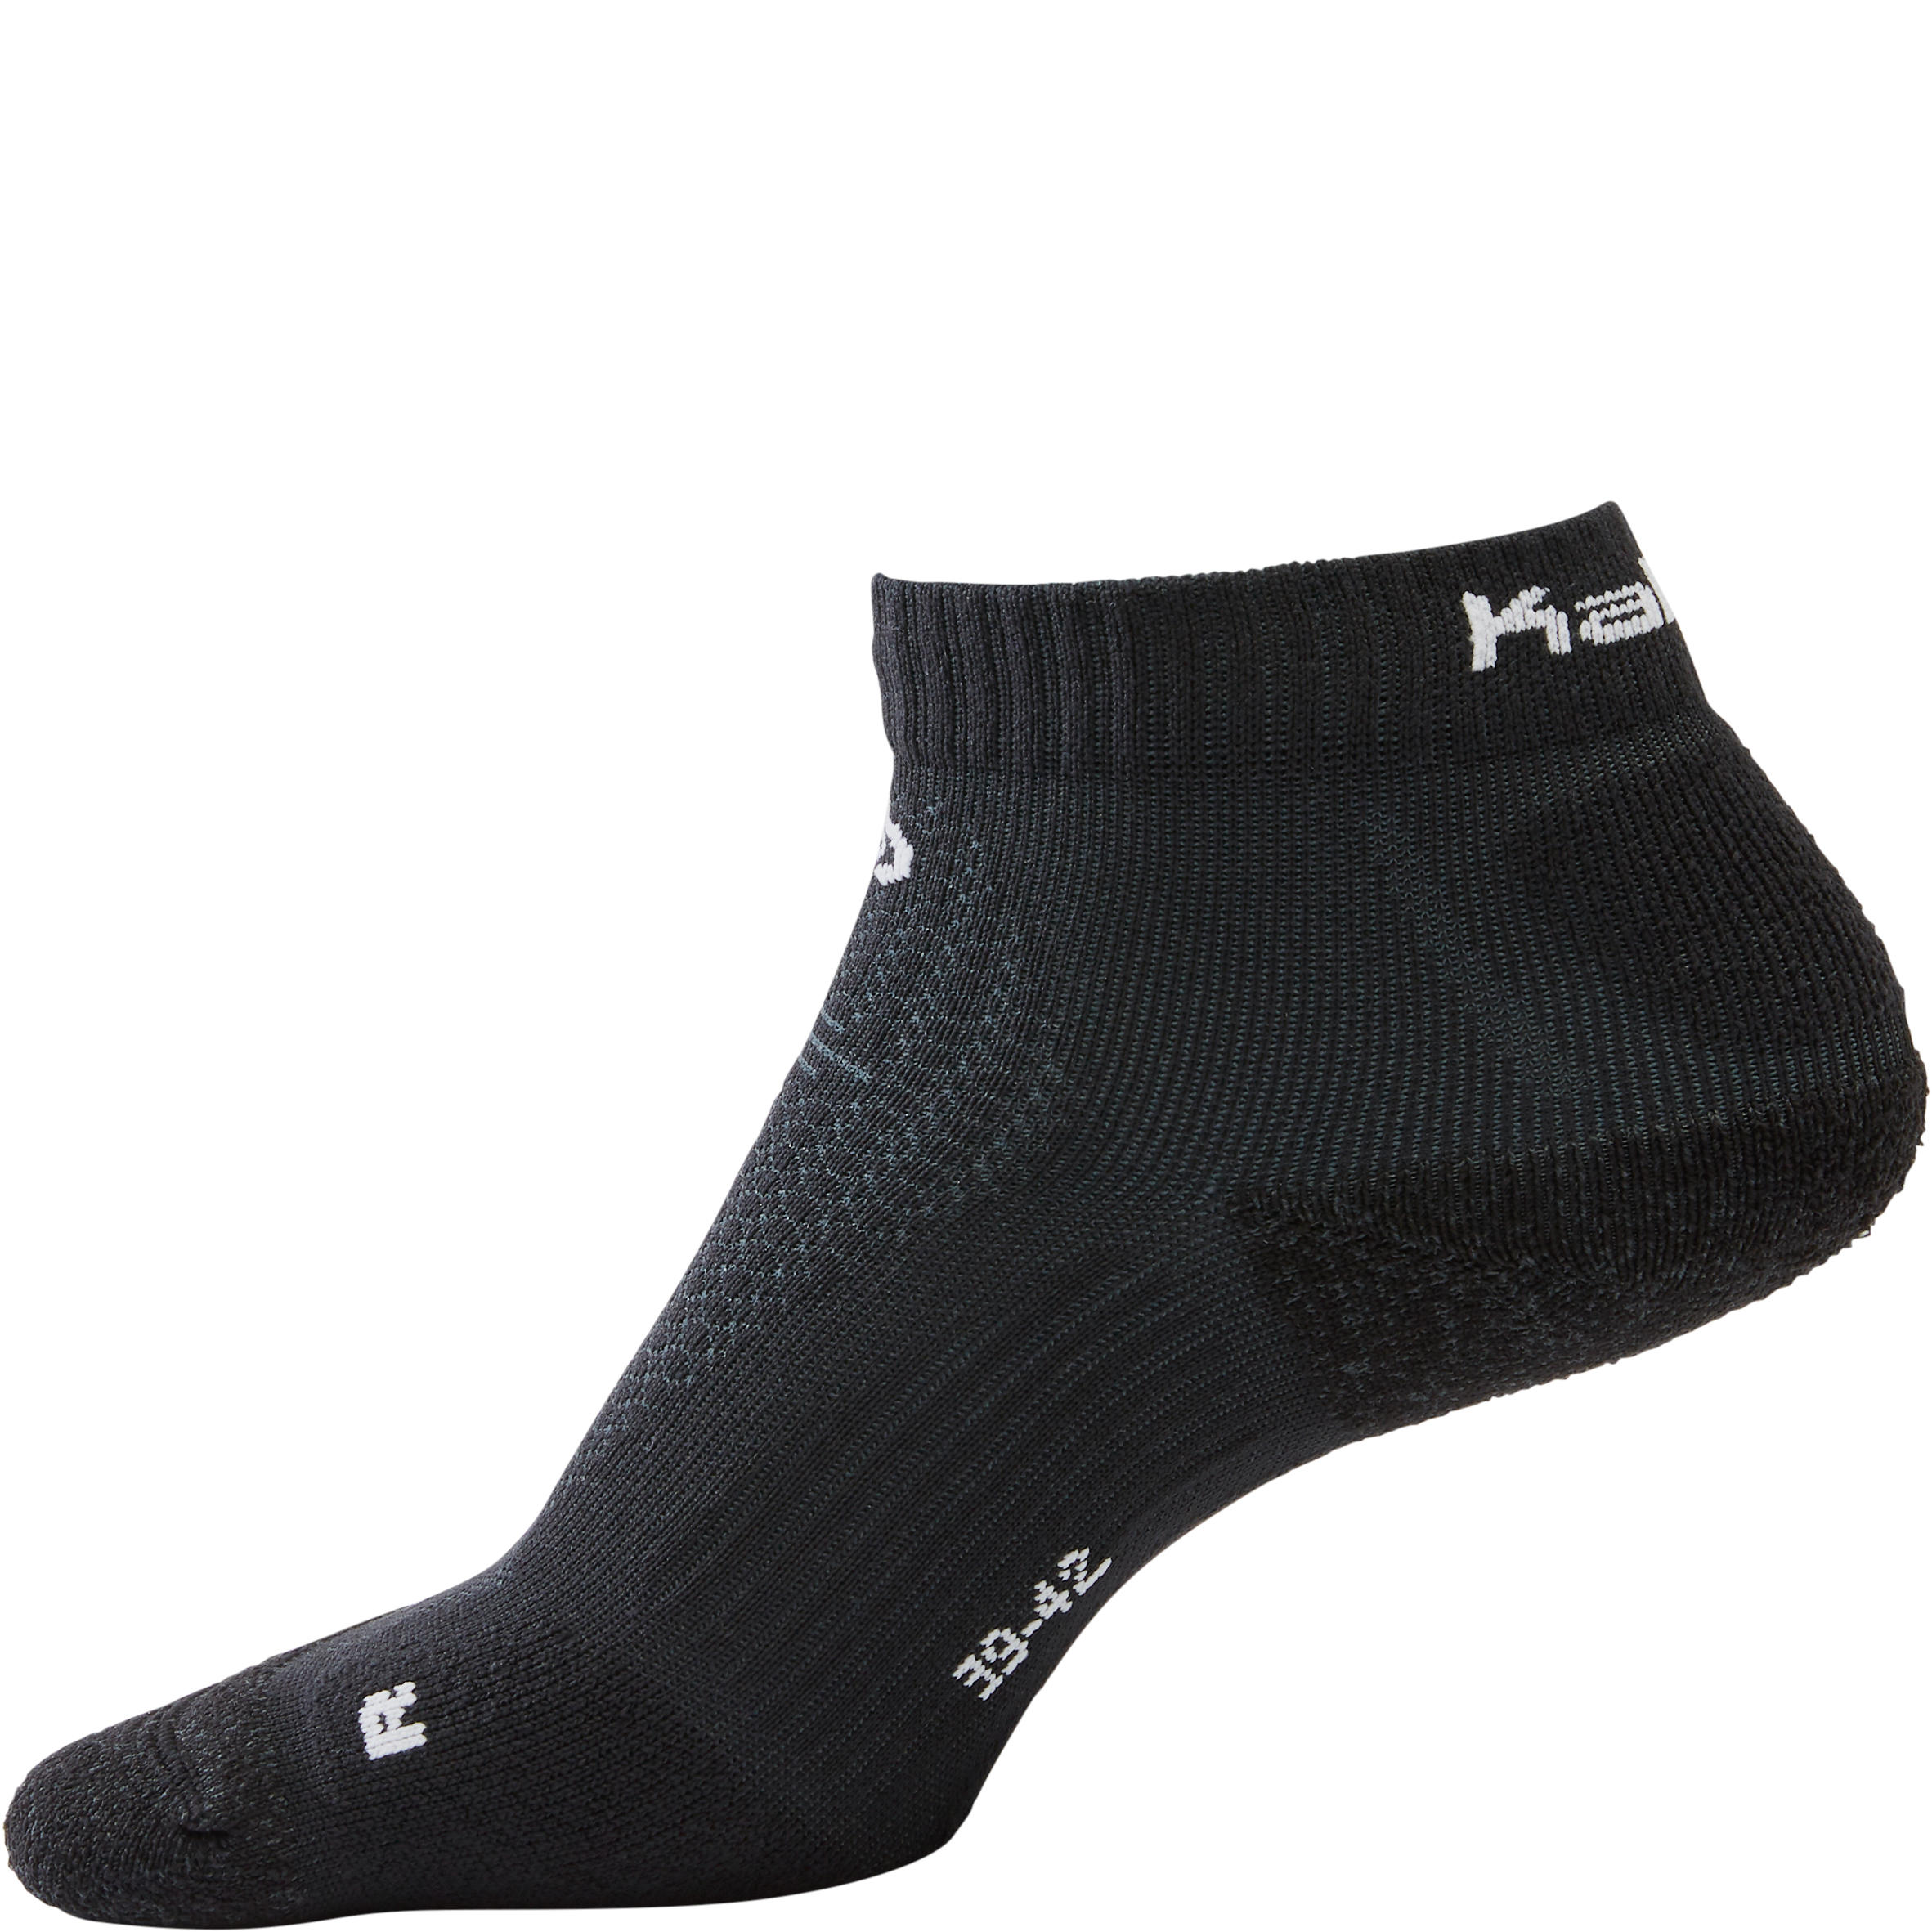 Details about   Unisex Thick Mid Cut Running Socks KIPRUN Thick Socks for Running Jogging 